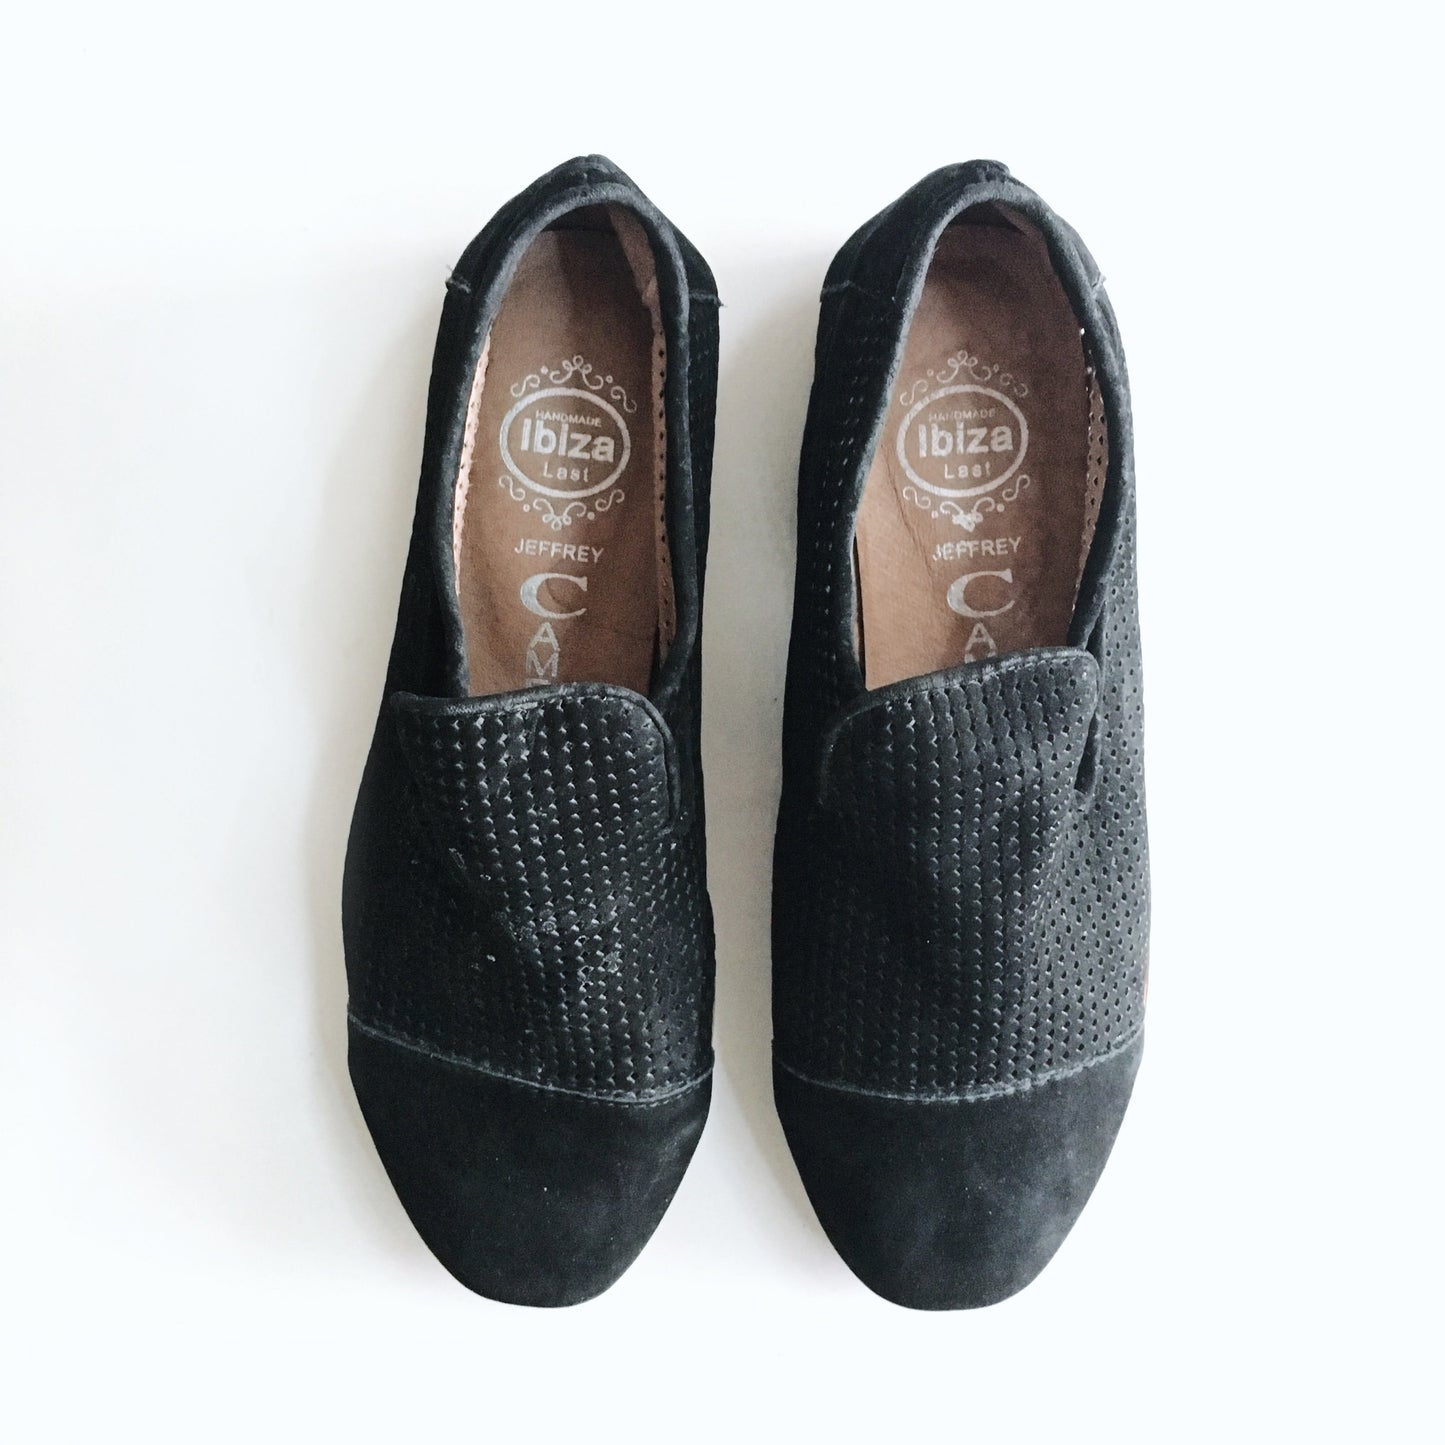 Jeffrey Campbell Black Suede Loafers - size 6